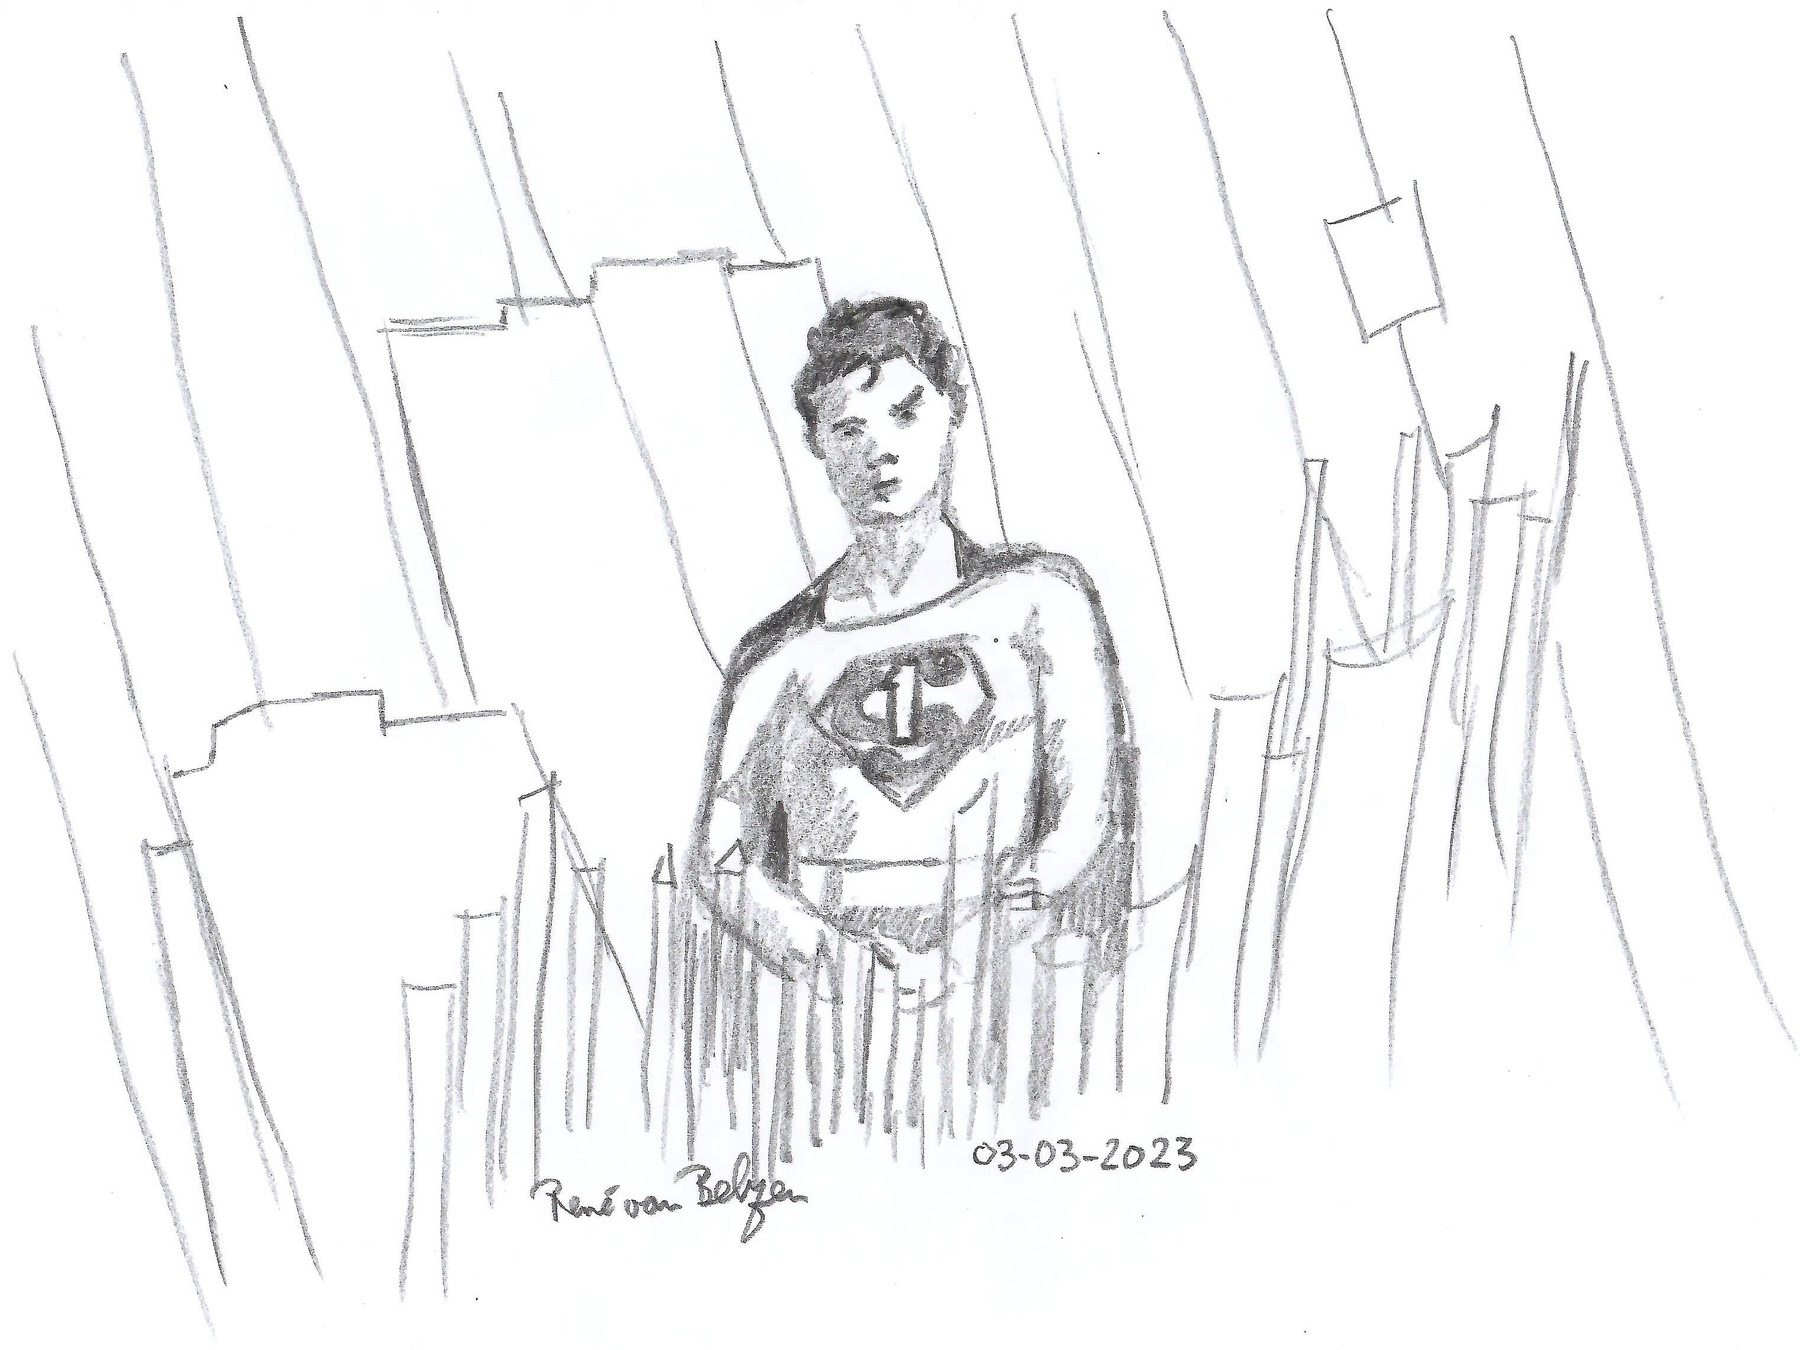 My contribution for the micro.blog challenge for March 3, solitude. It is a photo of a pencil-on-paper drawing of the concept solitude. This superdude is all on his own, figuring stuff out with his alien crystal and so. It is like february 14 all over (Singles Awareness Day) #mbmar